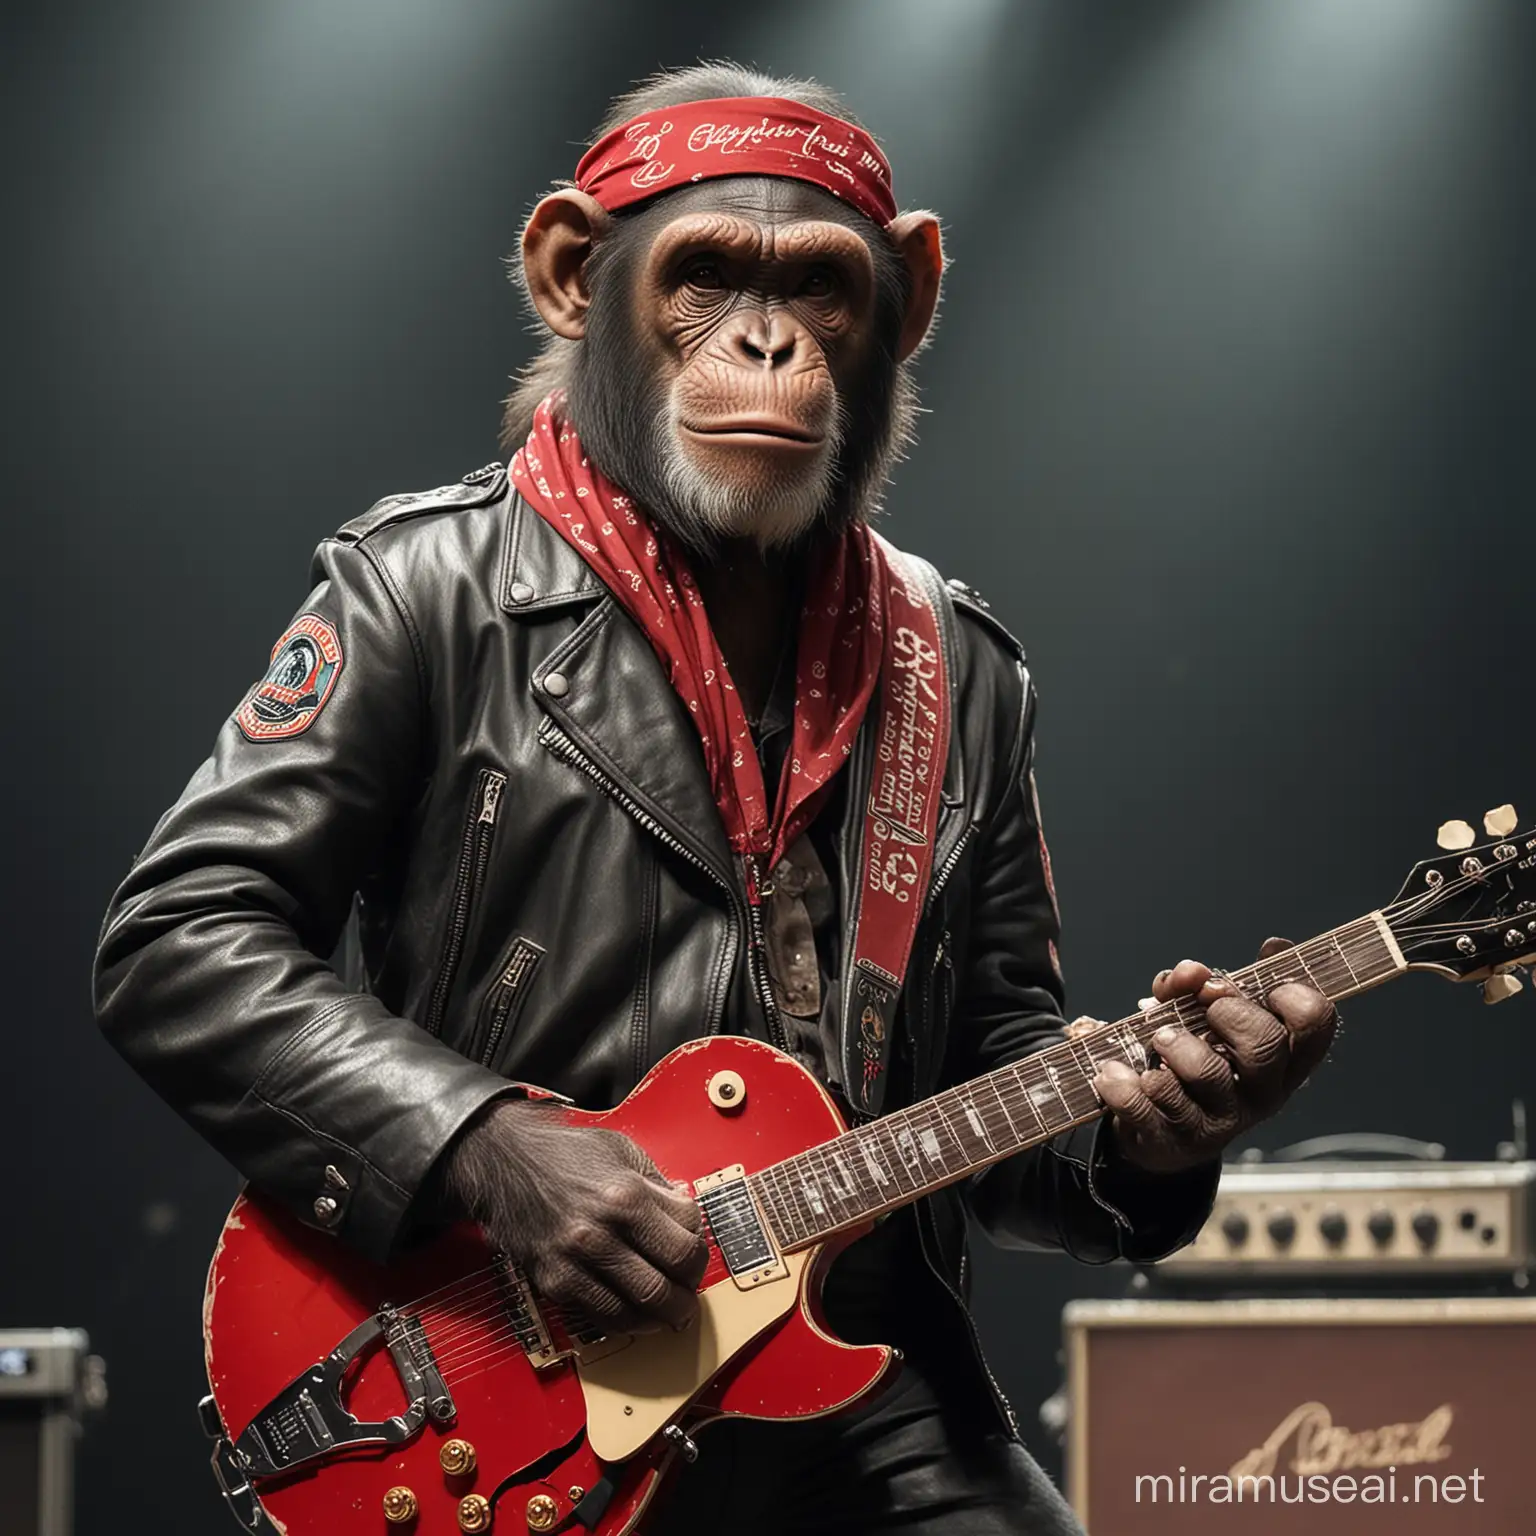 A chimpanzee, playing a Gibson Les Paul, on stage, wearing a leather jacket and a red bandana